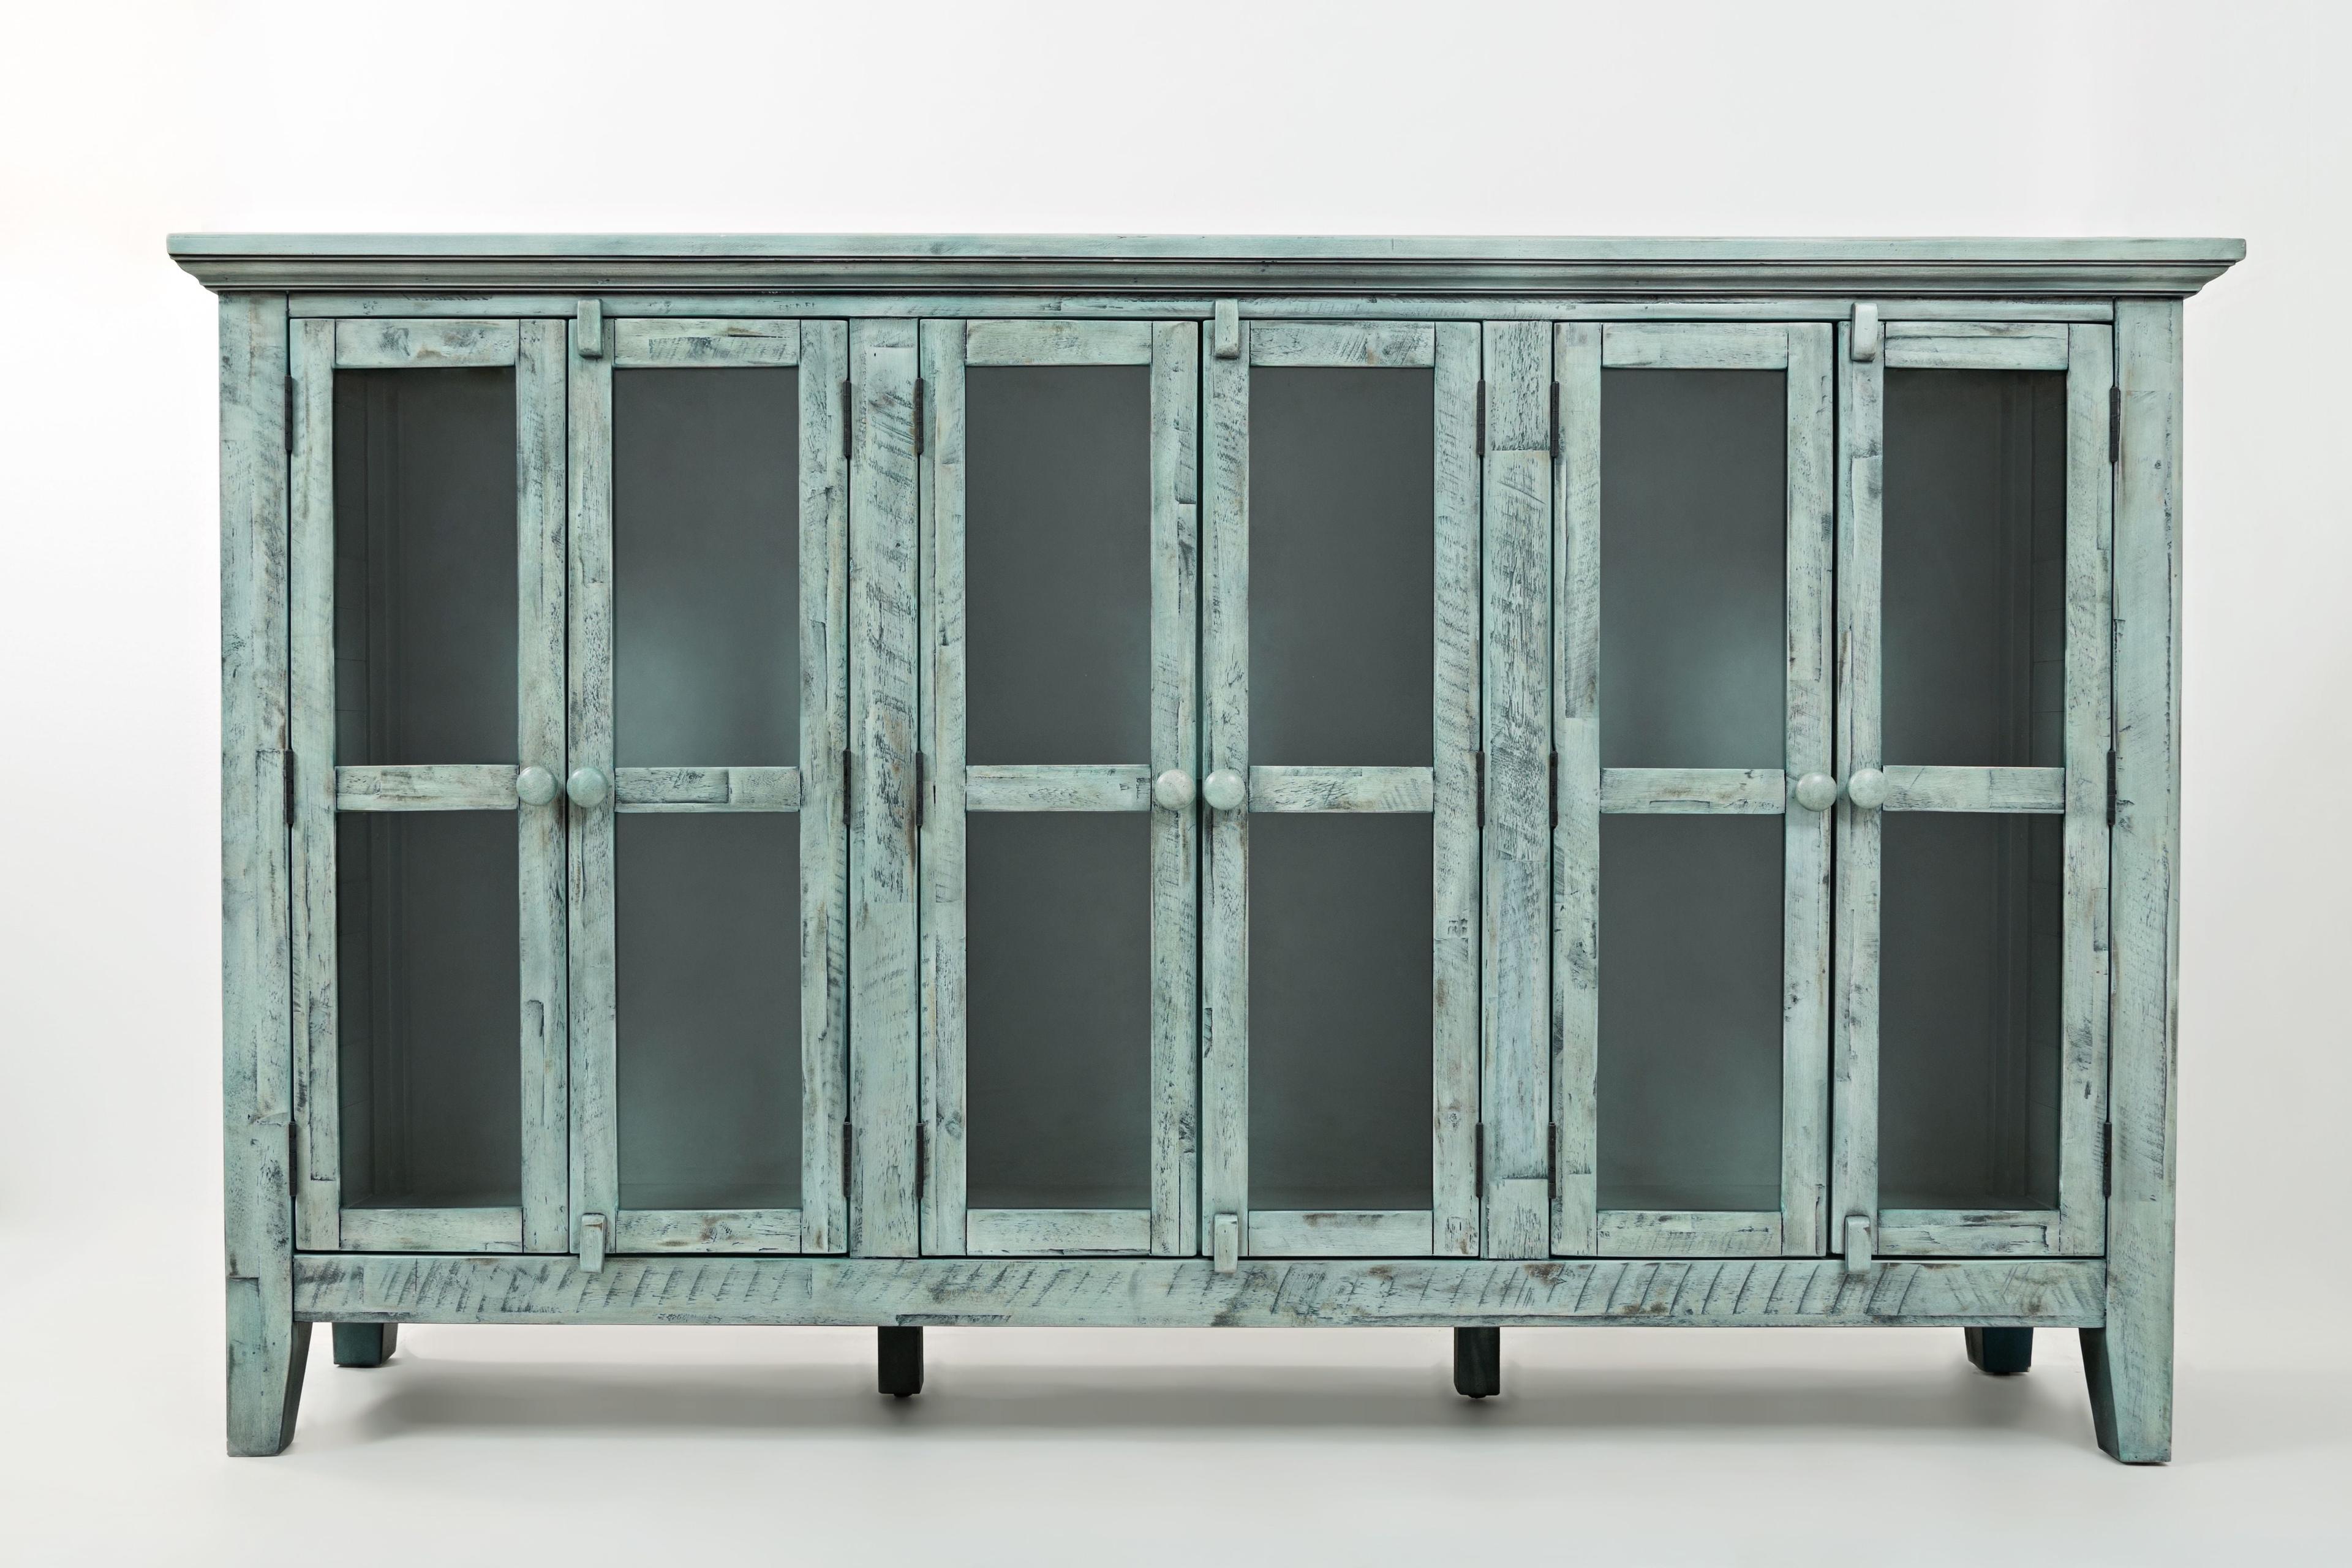 Coastal Surfside Blue 70" Wide Acacia Wood Accent Cabinet with Adjustable Shelving